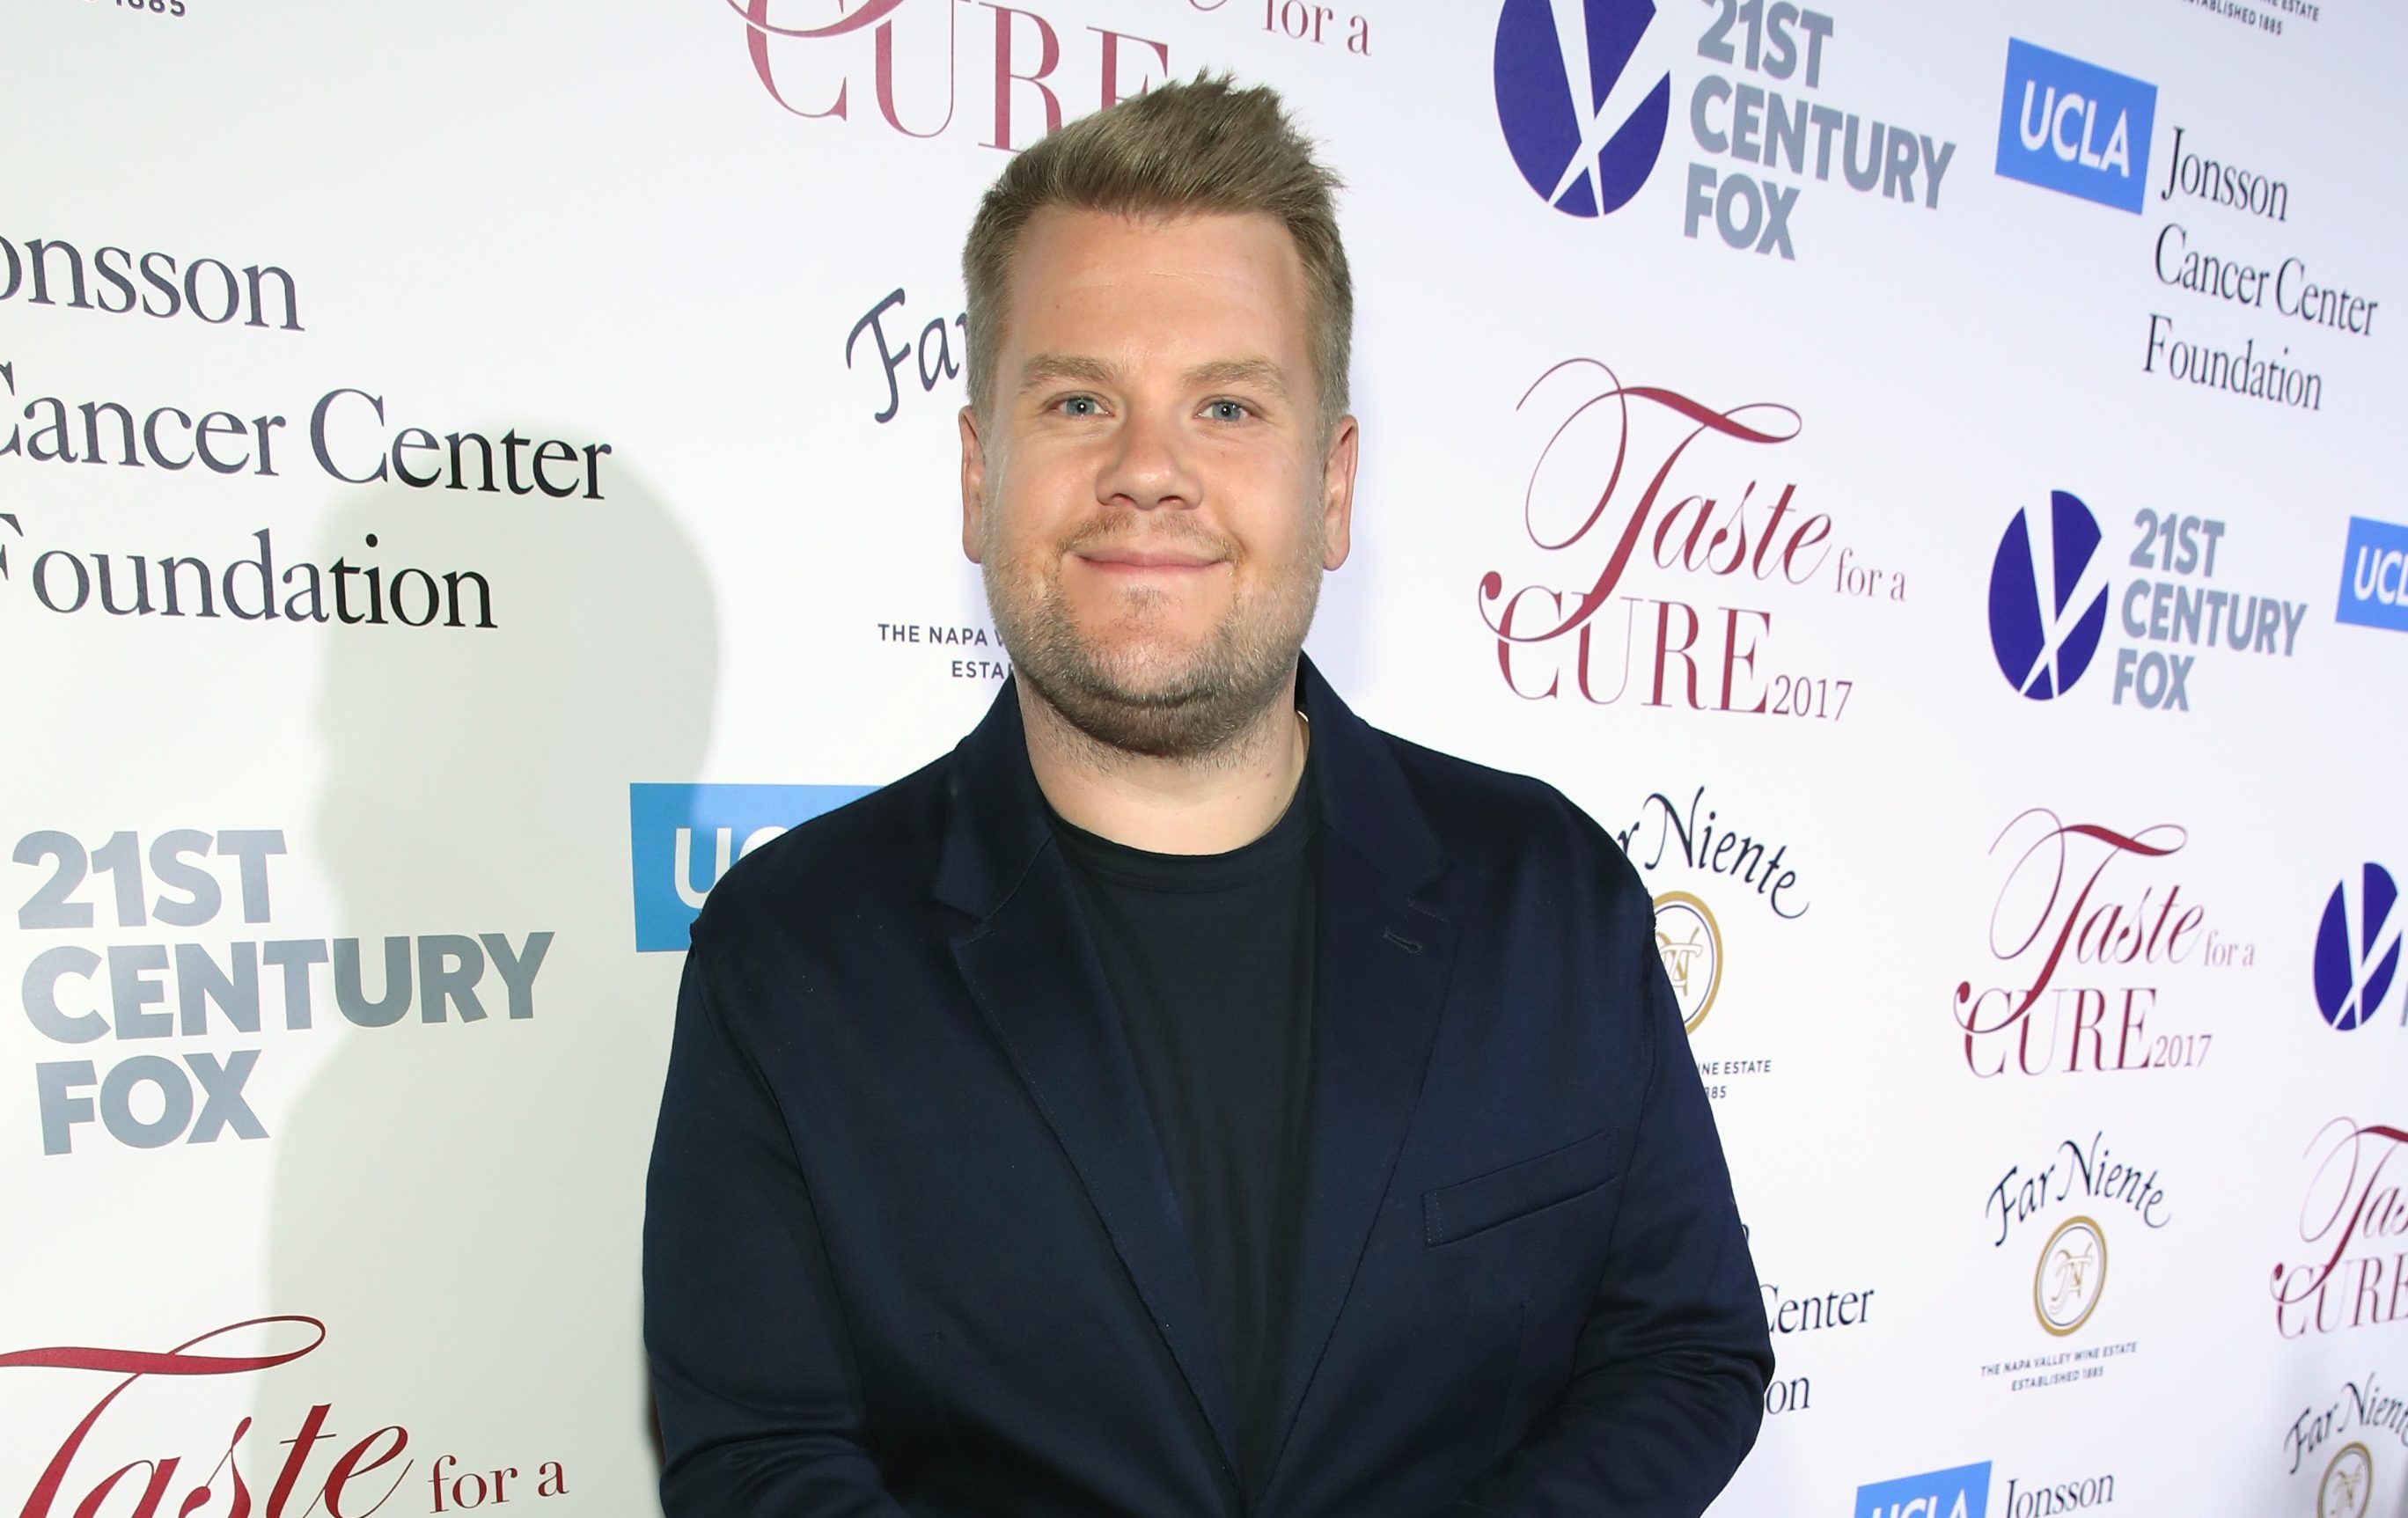 Presenter James Corden attends the UCLA Jonsson Cancer Center Foundation Hosts 22nd Annual "Taste for a Cure" event honoring Yael and Scooter Braun (Jonathan Leibson/Getty Images for UCLA Jonsson Cancer Center Foundation)